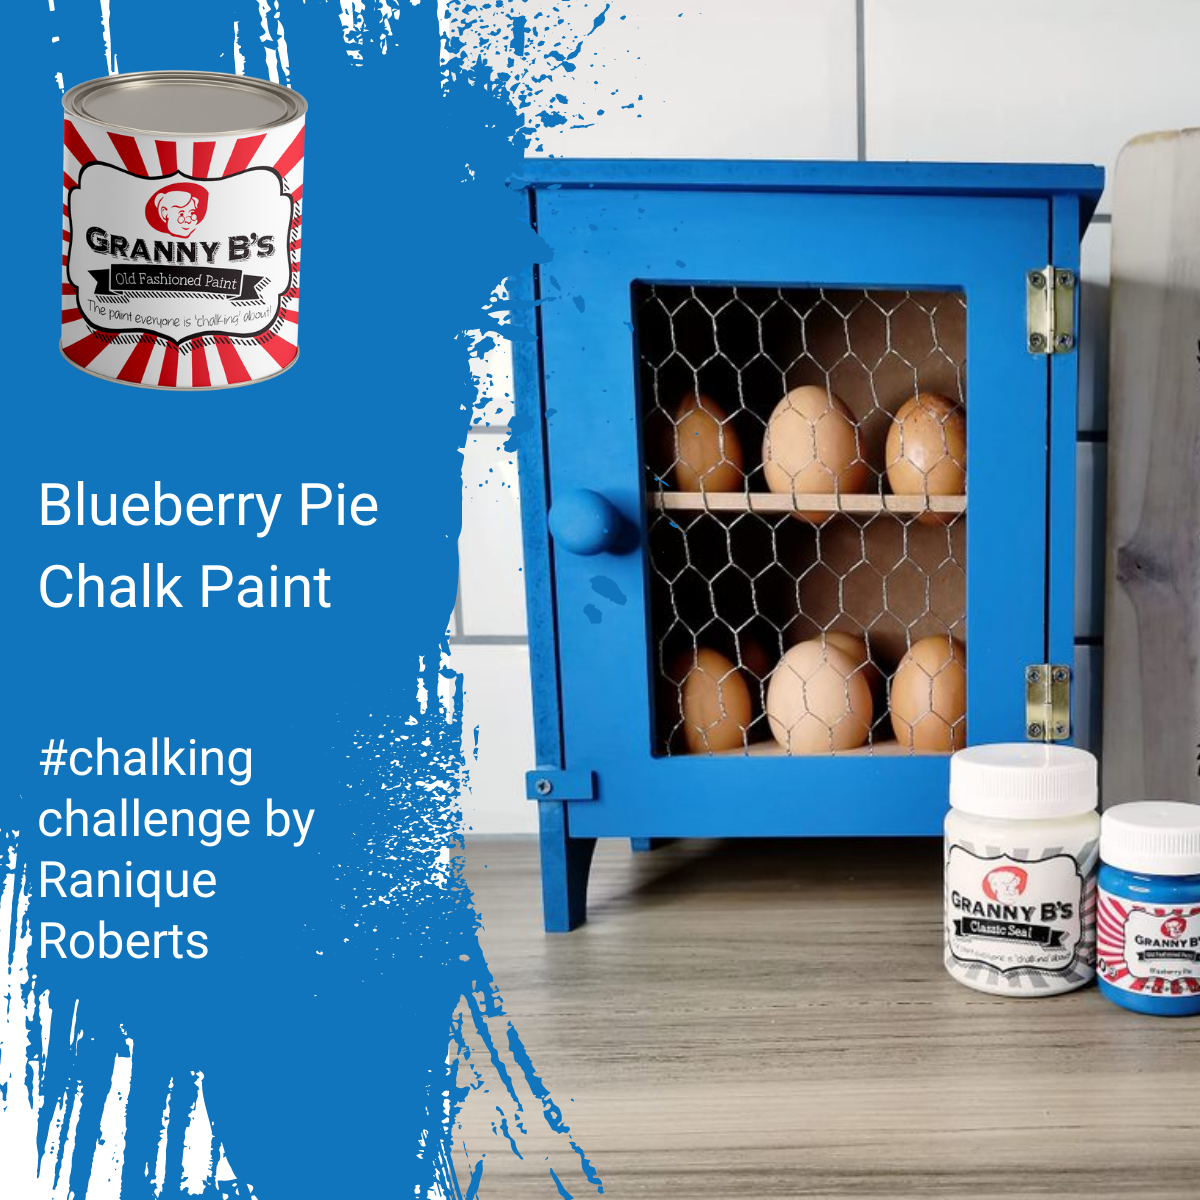 Chalkpaint - Blueberry Pie (Bright Blue)